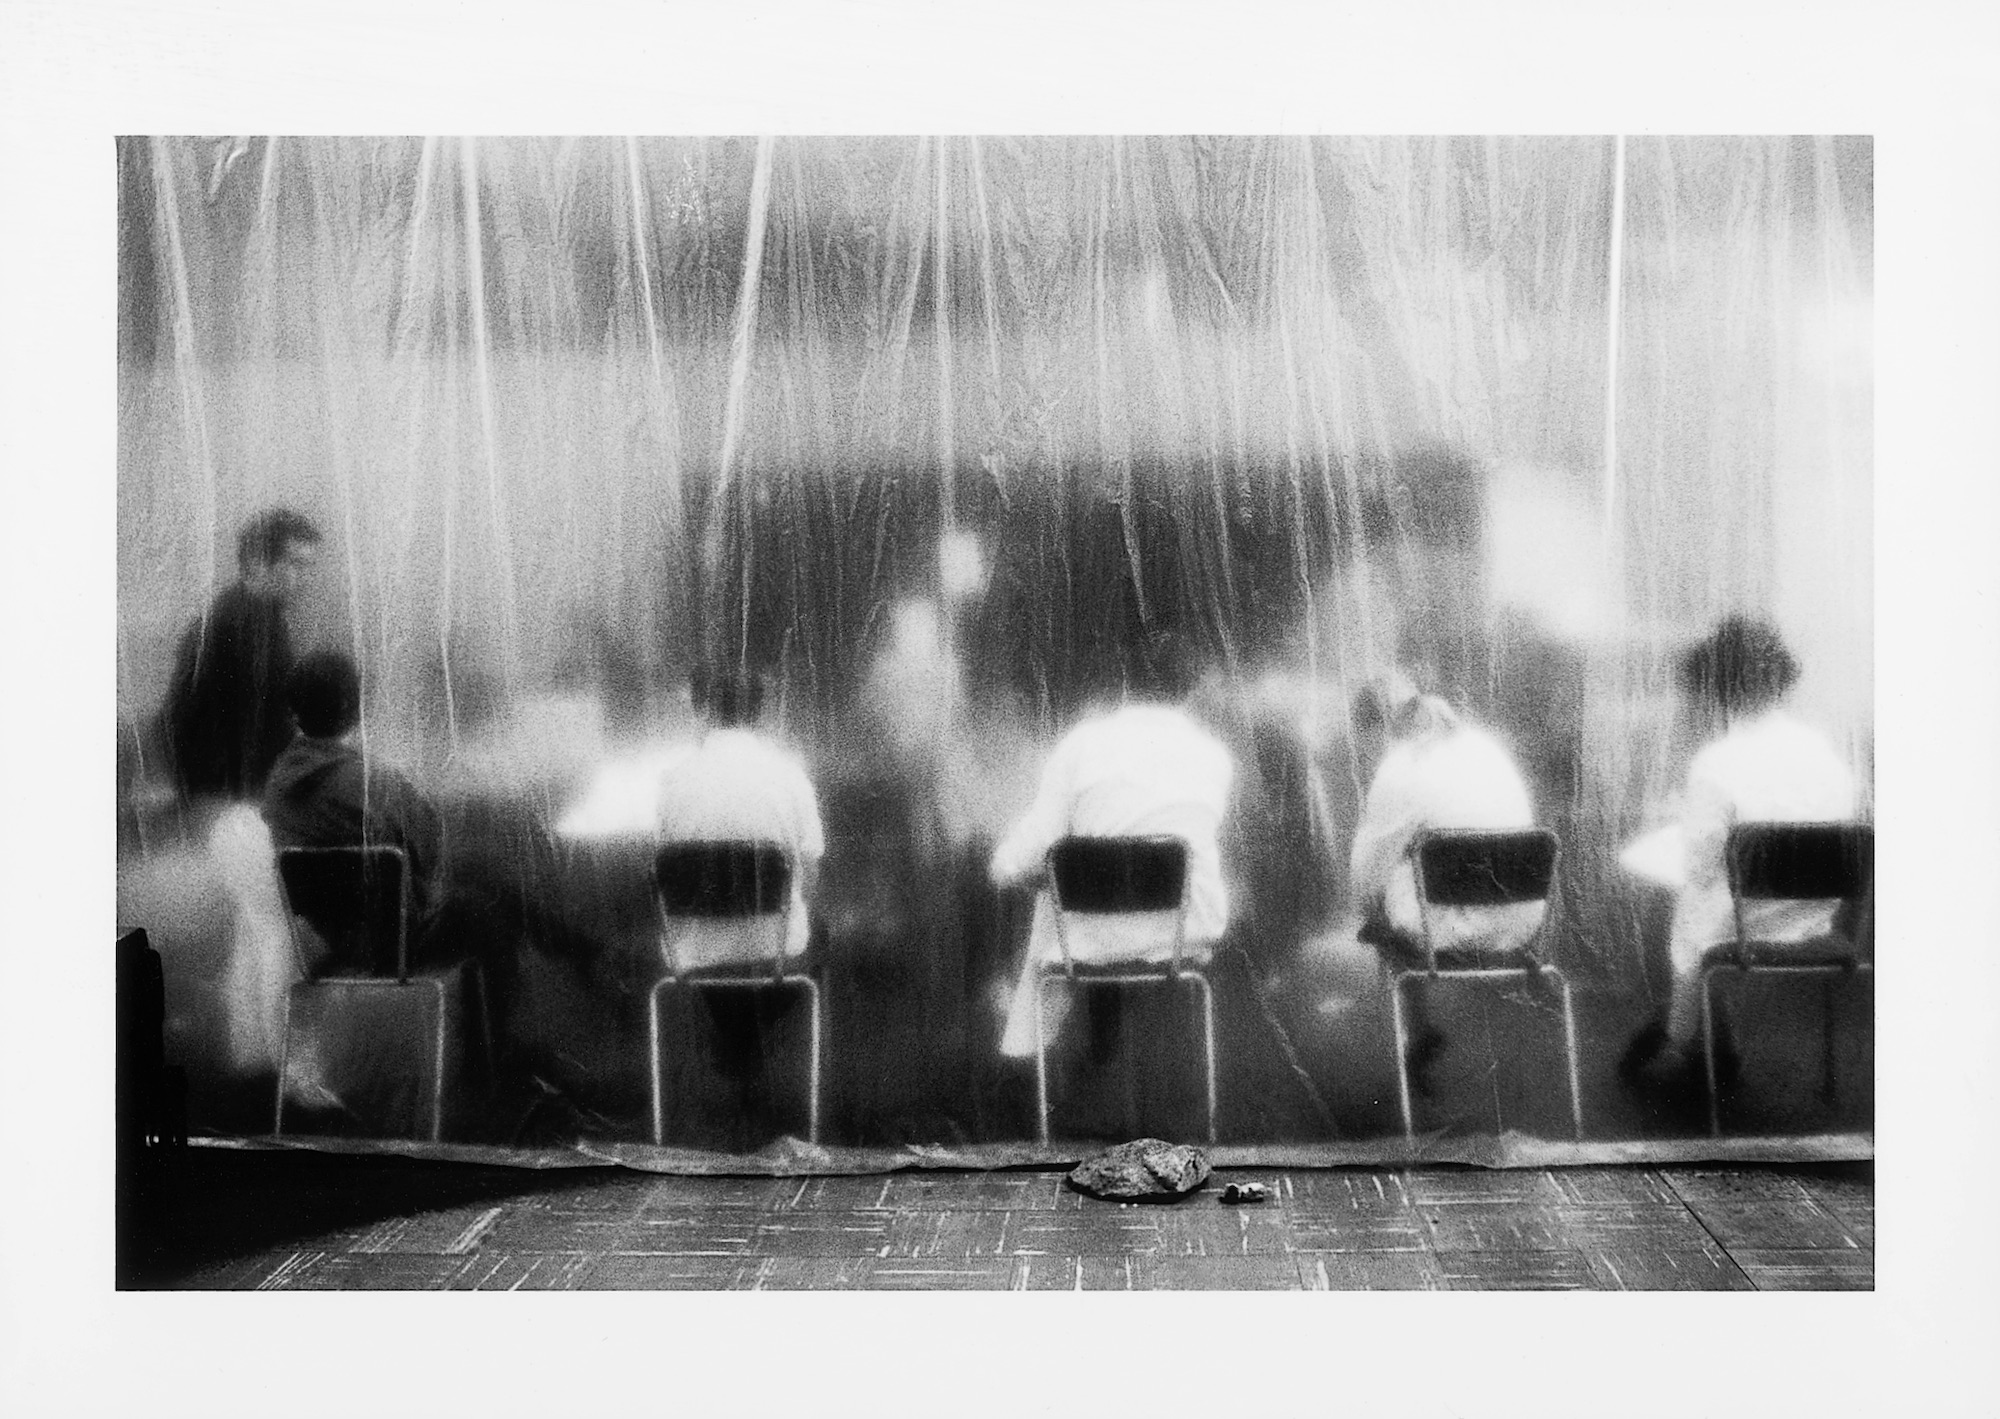 In a black and white photo, a group of shadow-like actors, mostly wearing white coats and sitting on dark chairs, are seen through a sheer plastic curtain.